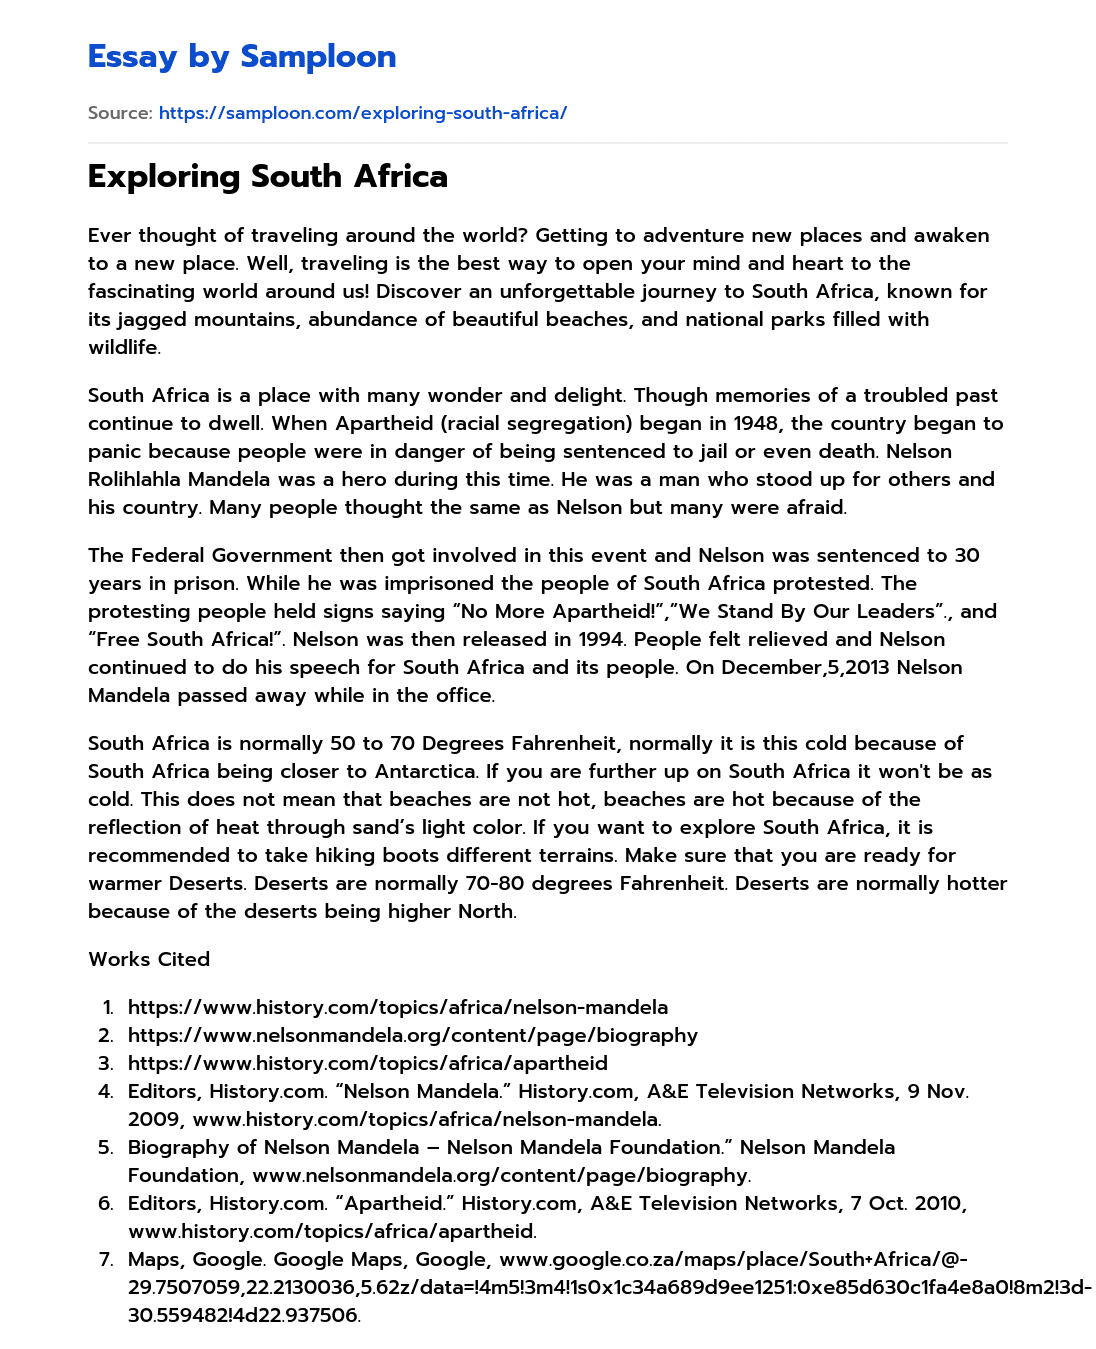 Exploring South Africa essay